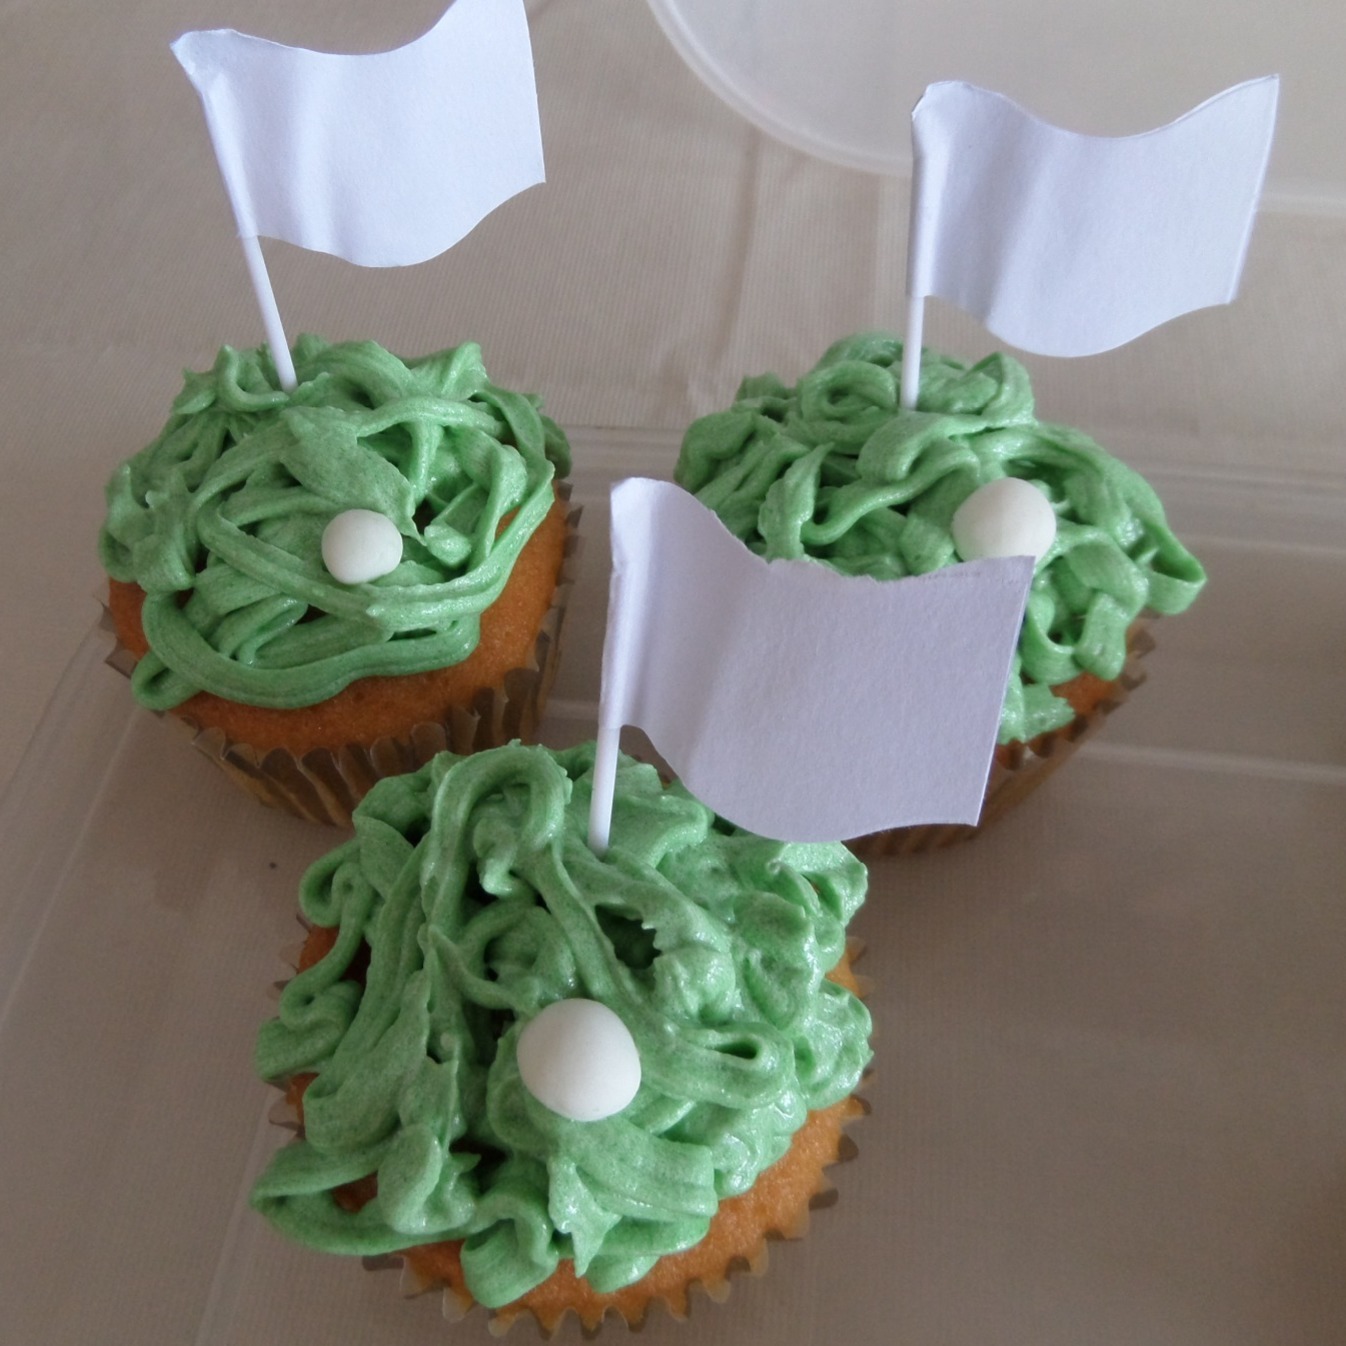 Golf inspired fathers day cupcakes/birthday